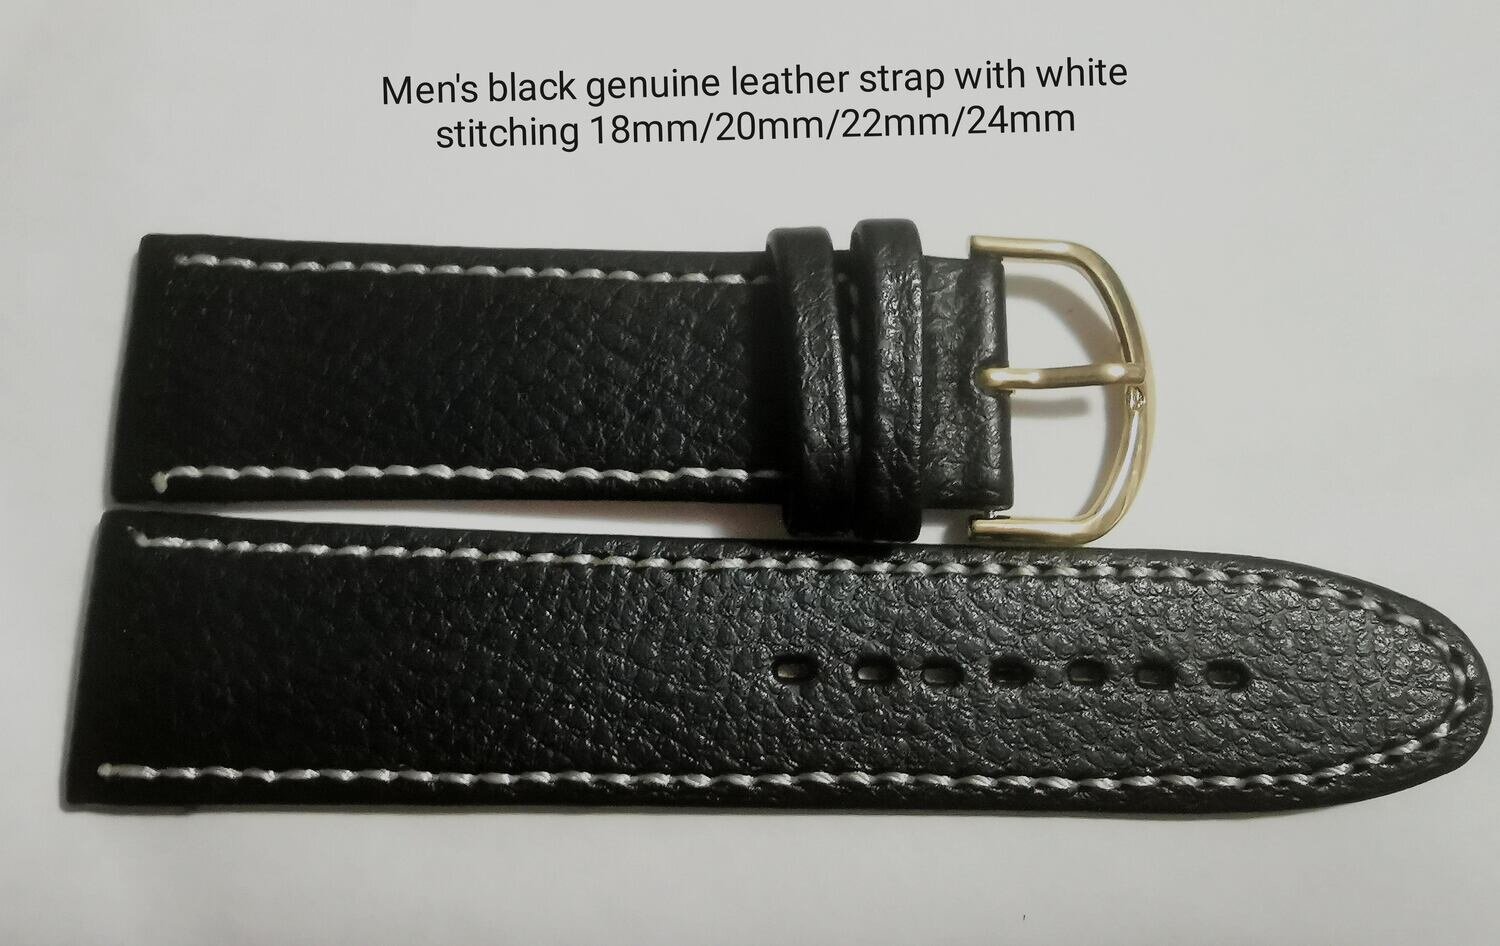 Men's black genuine leather strap with white stitching 18mm/20mm/22mm/24mm